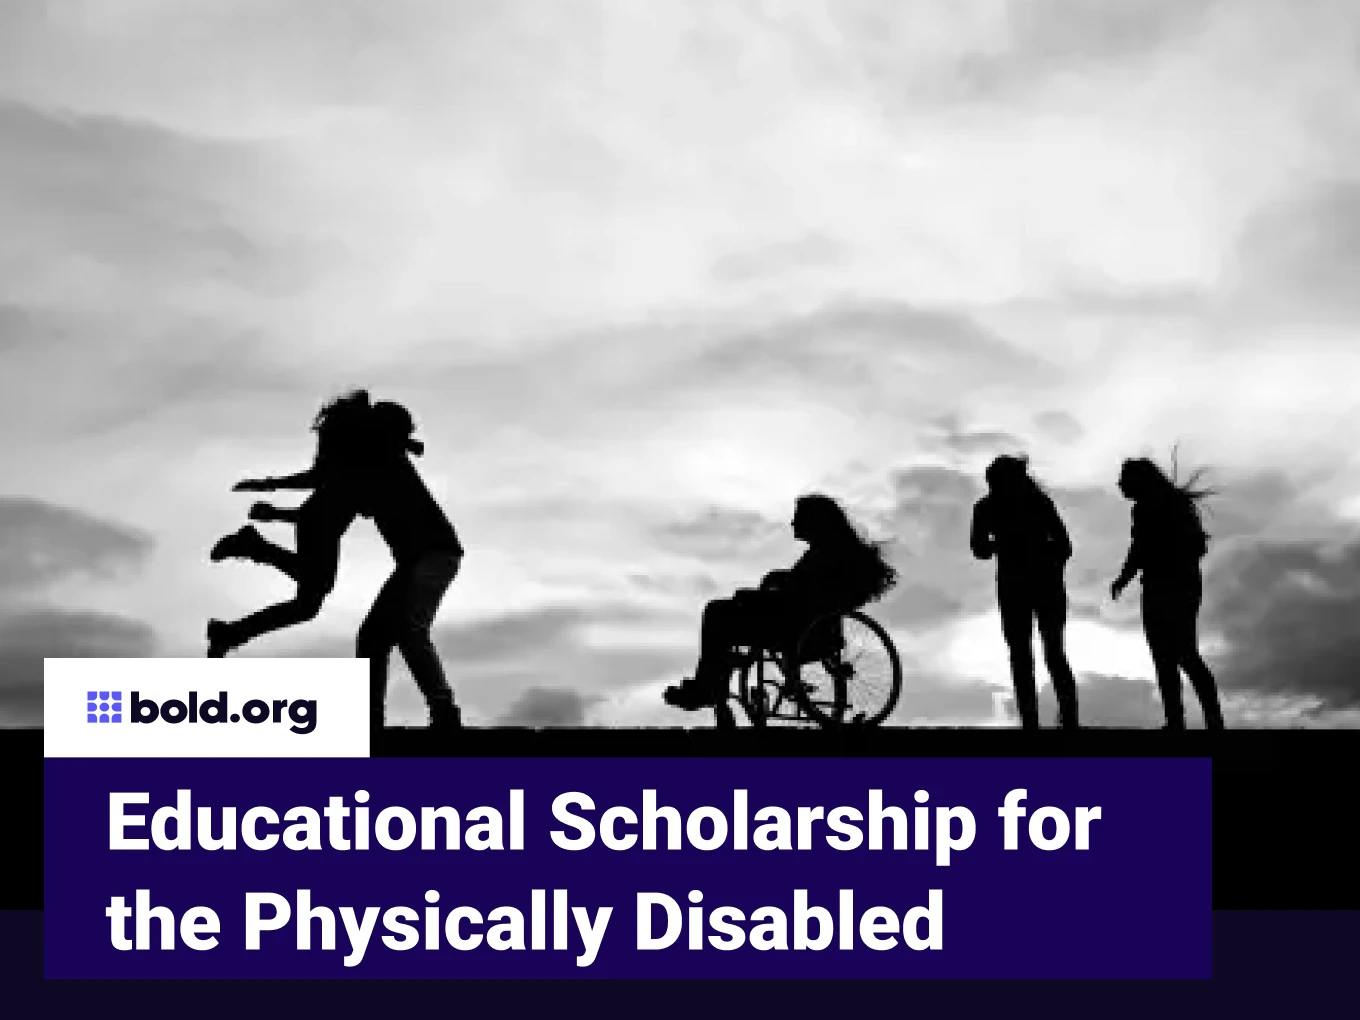 Frank and Patty Skerl Educational Scholarship for the Physically Disabled